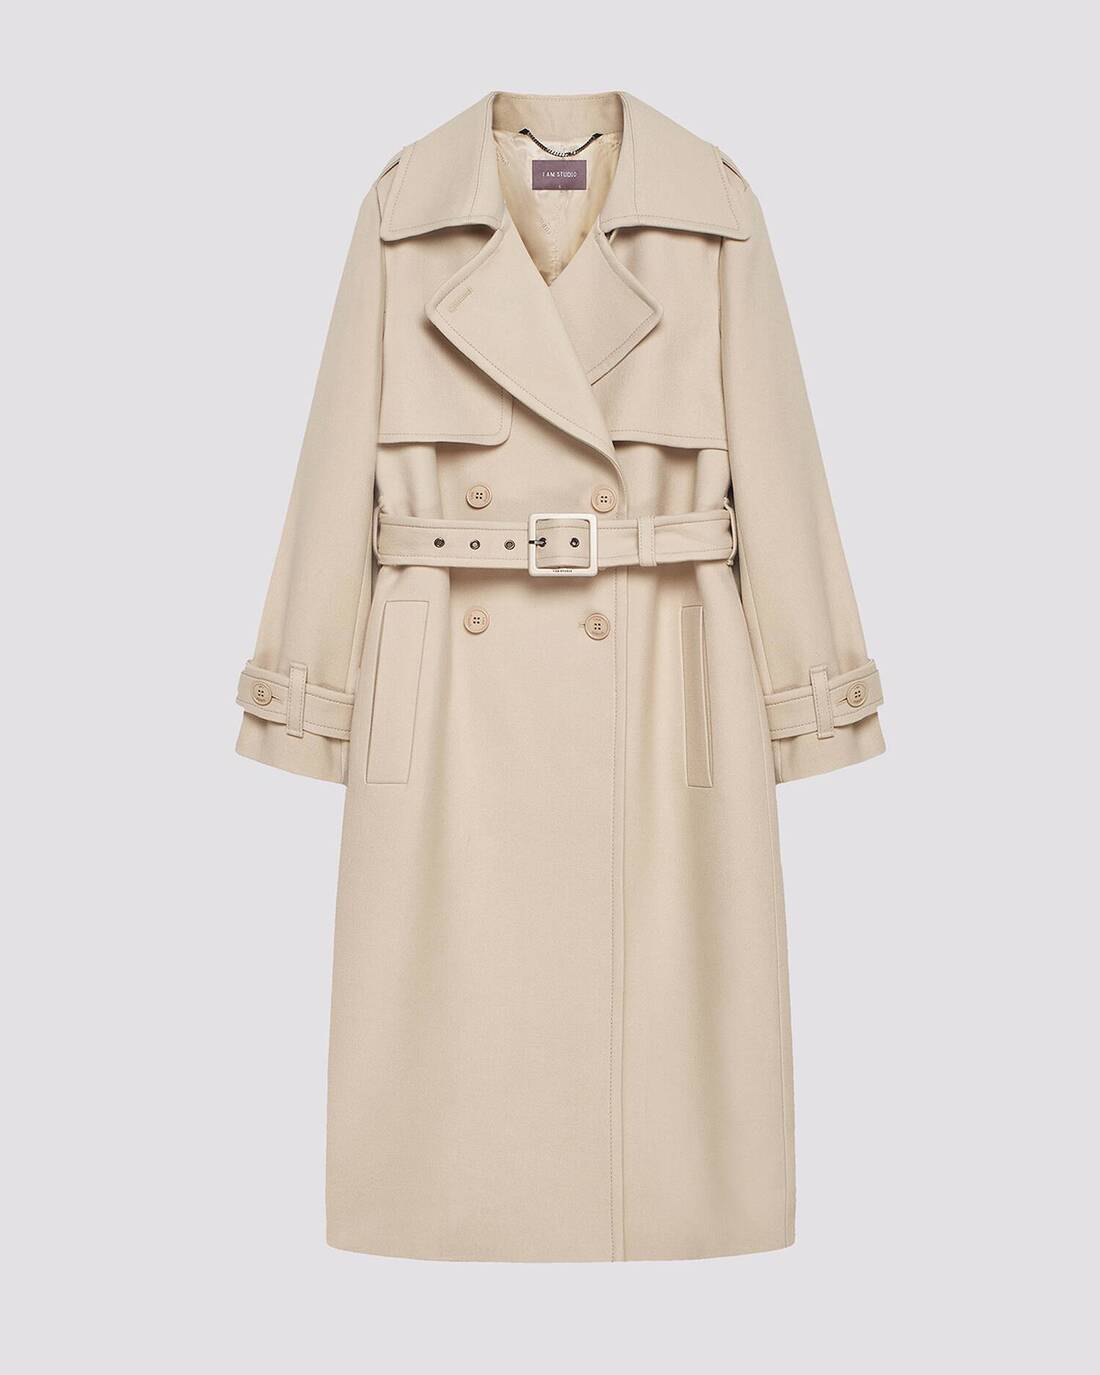 Double-breasted trench coat with a double yoke